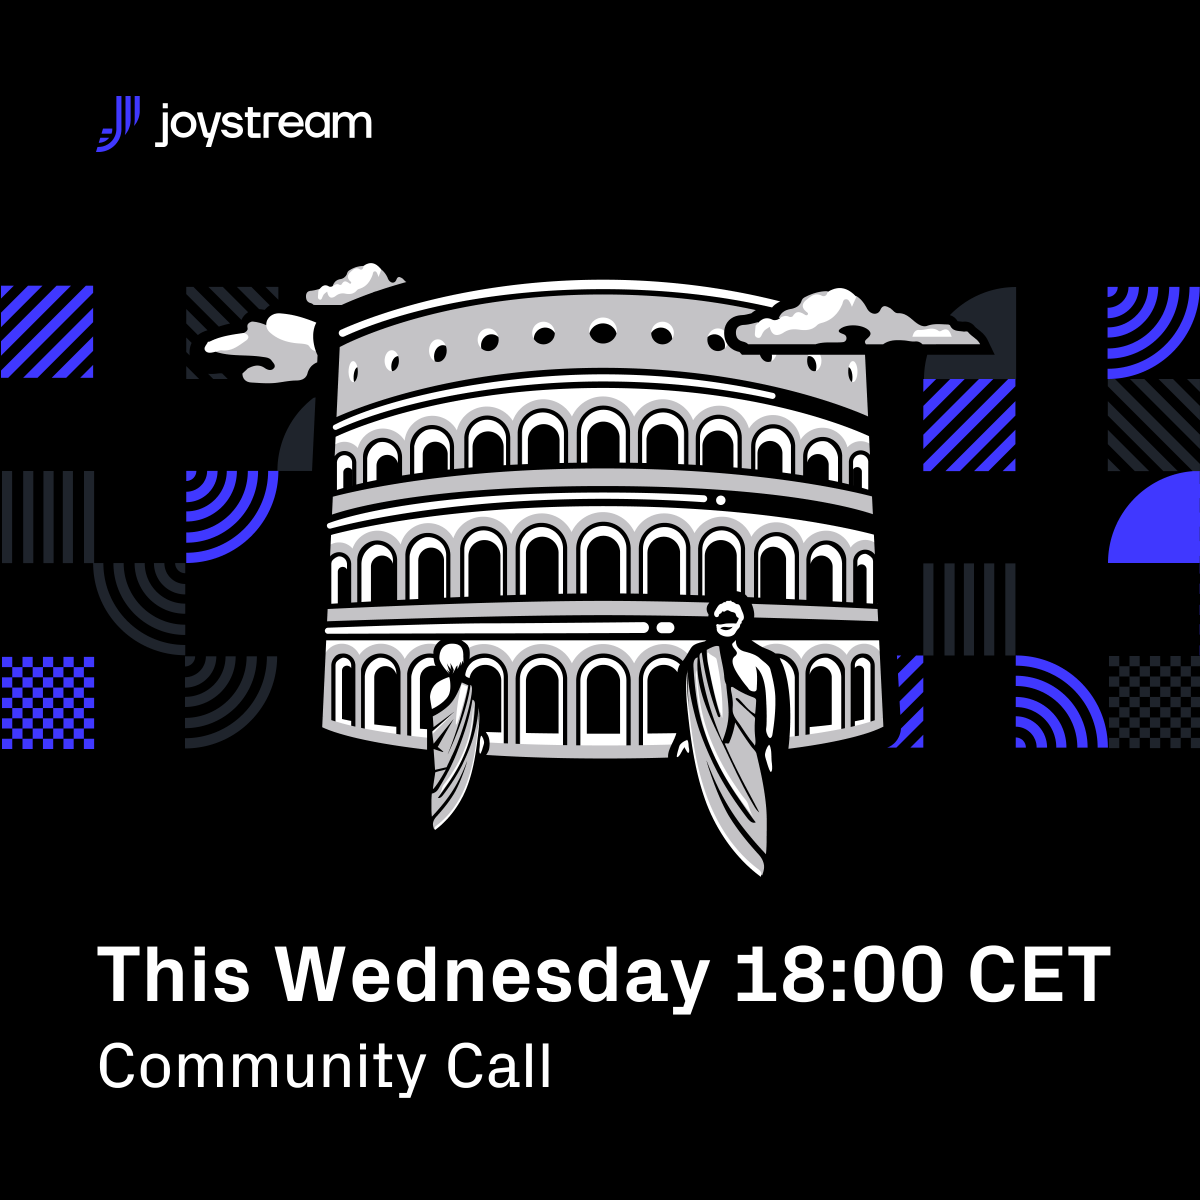 🎙 Community call tomorrow 6pm CET

Feel free to ask a question here in the replies ⬇️ 